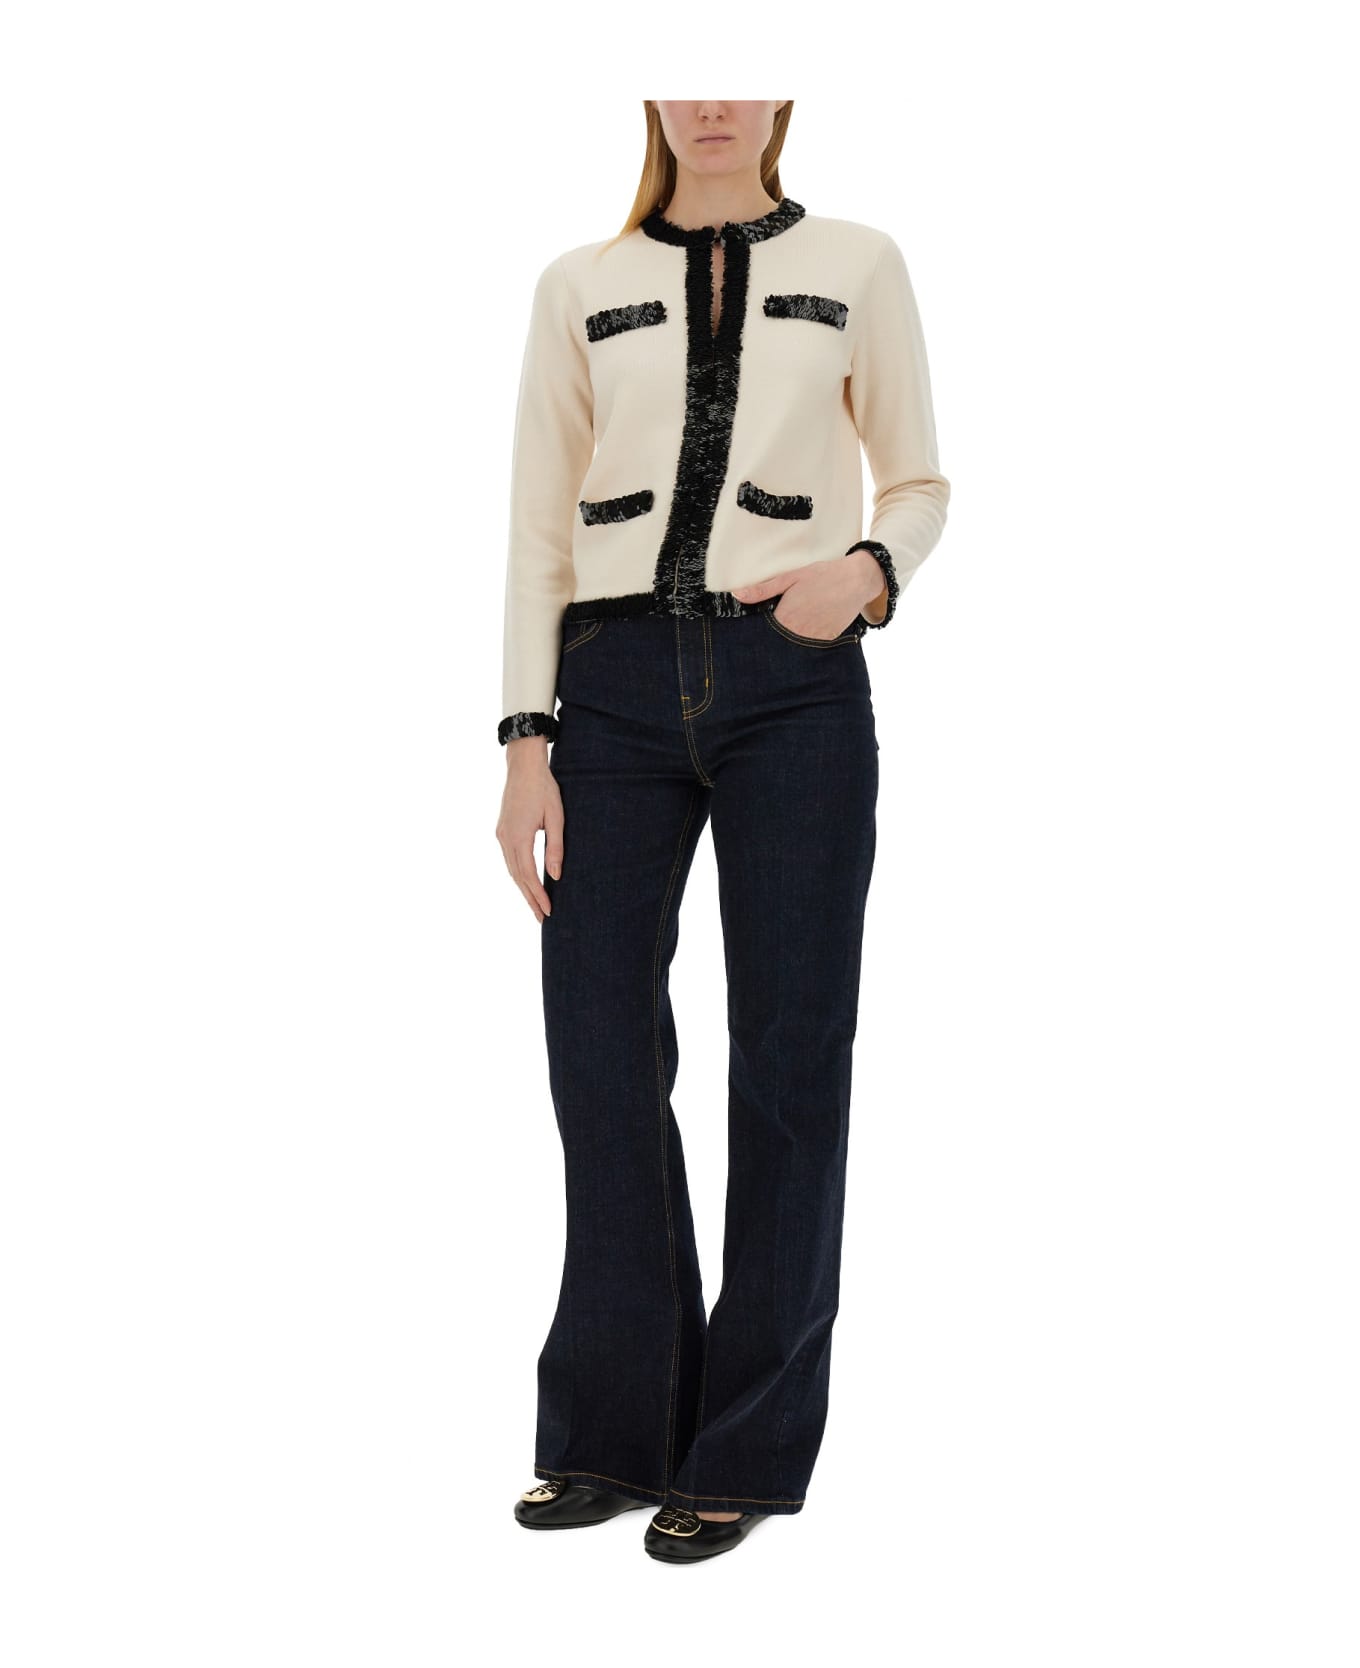 Tory Burch Sequin-embellished Cardigan - White/Black